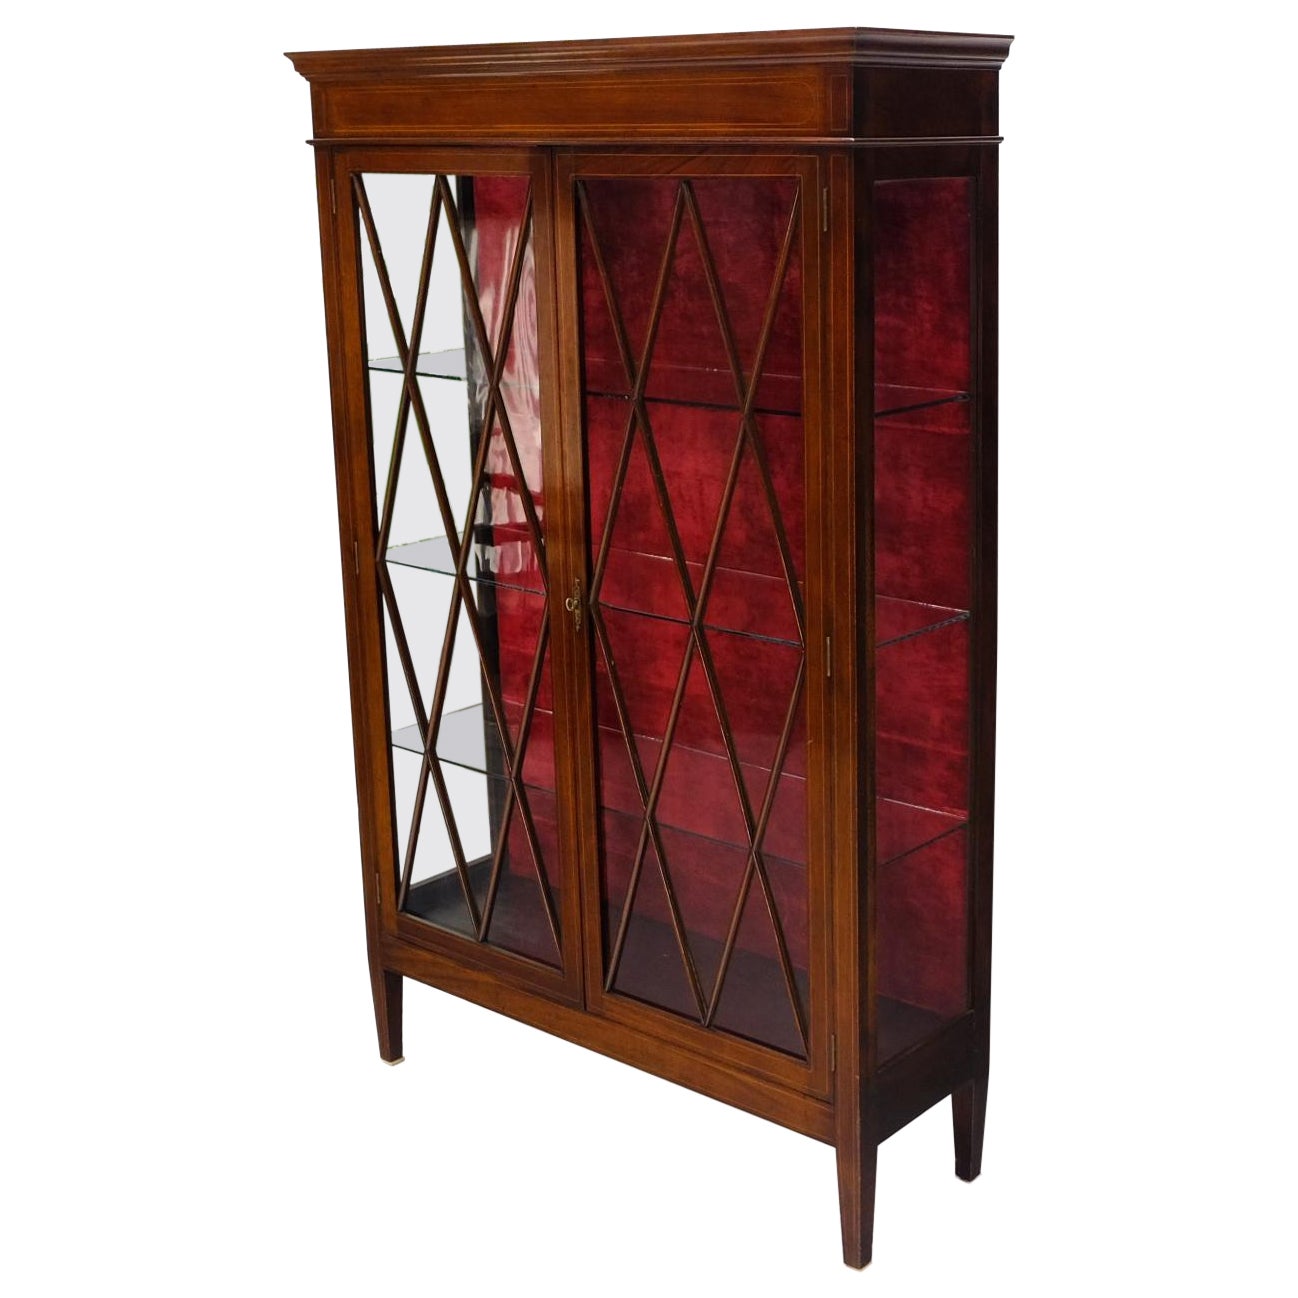 Individual Glass Pane Double Doors Pencil Inlay Flame Mahogany Show Case For Sale